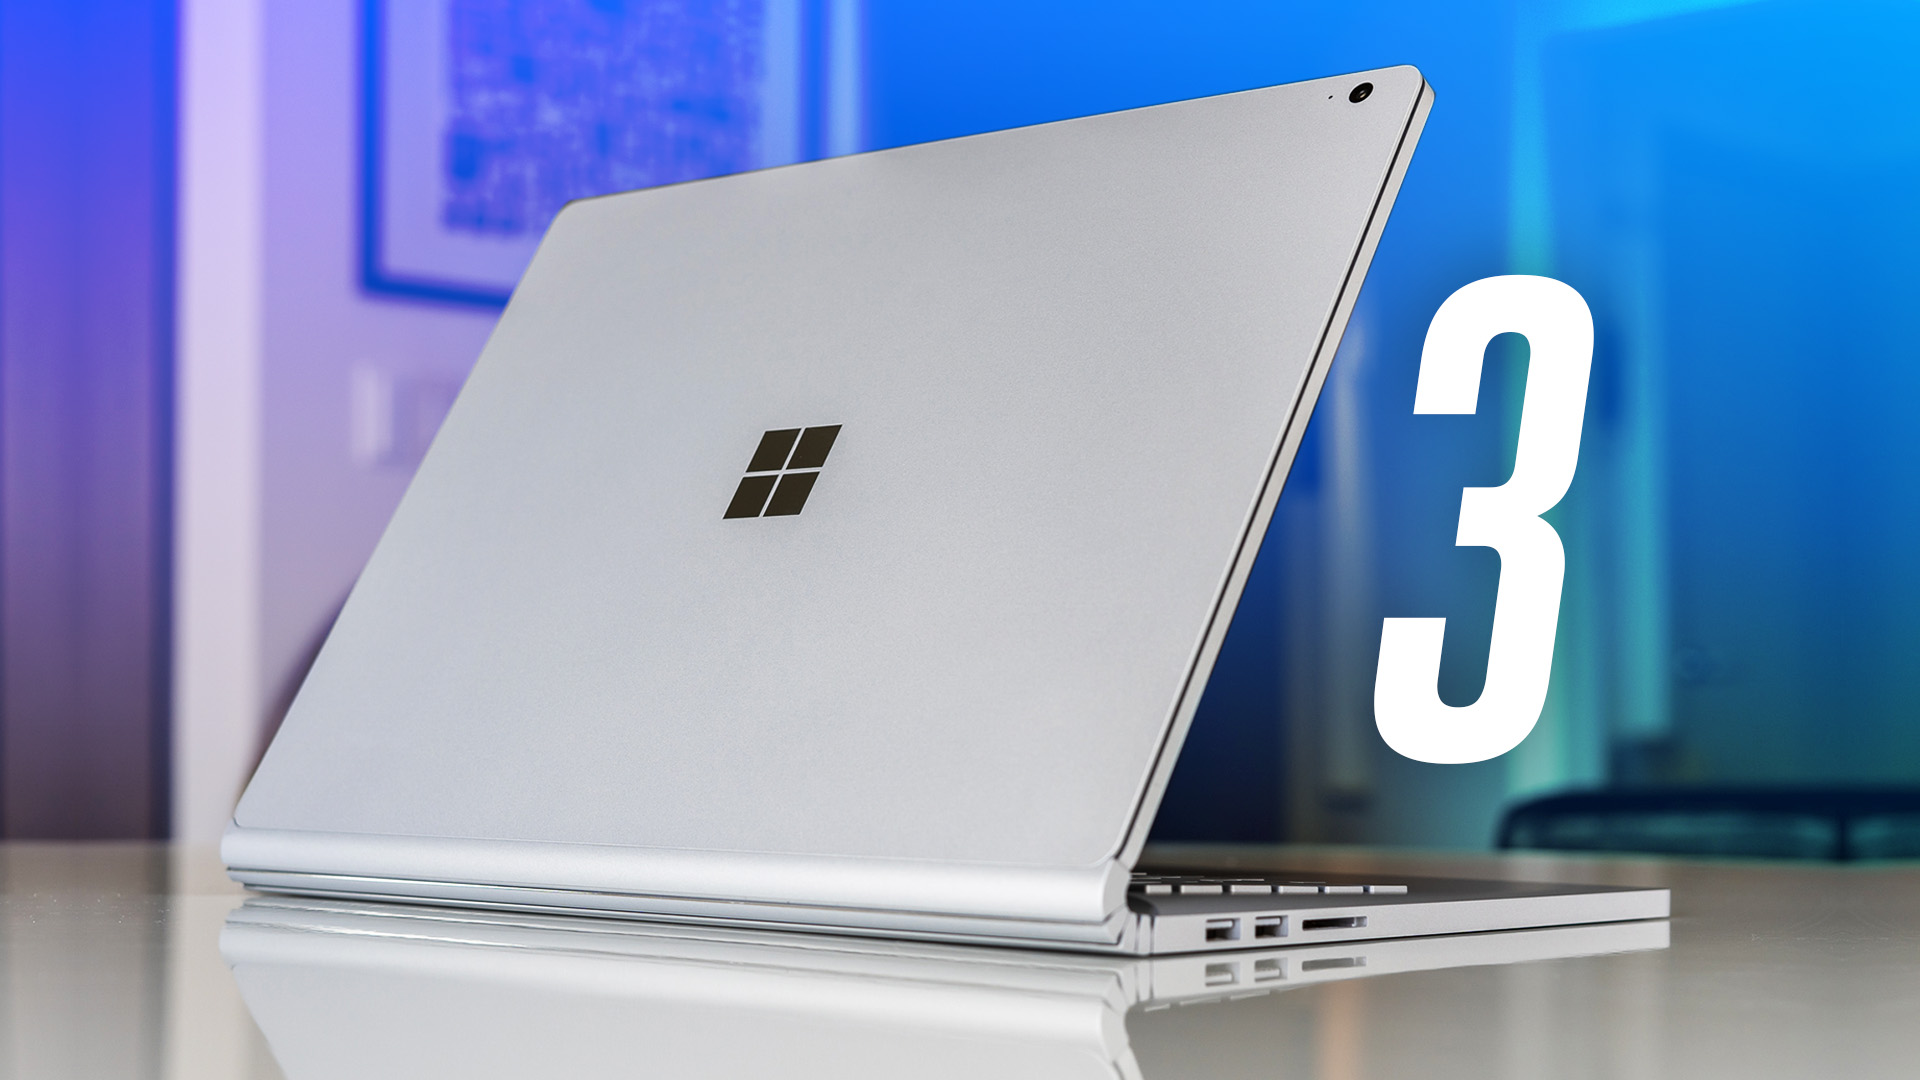 Surface Book 3 (13.5-inch) first look